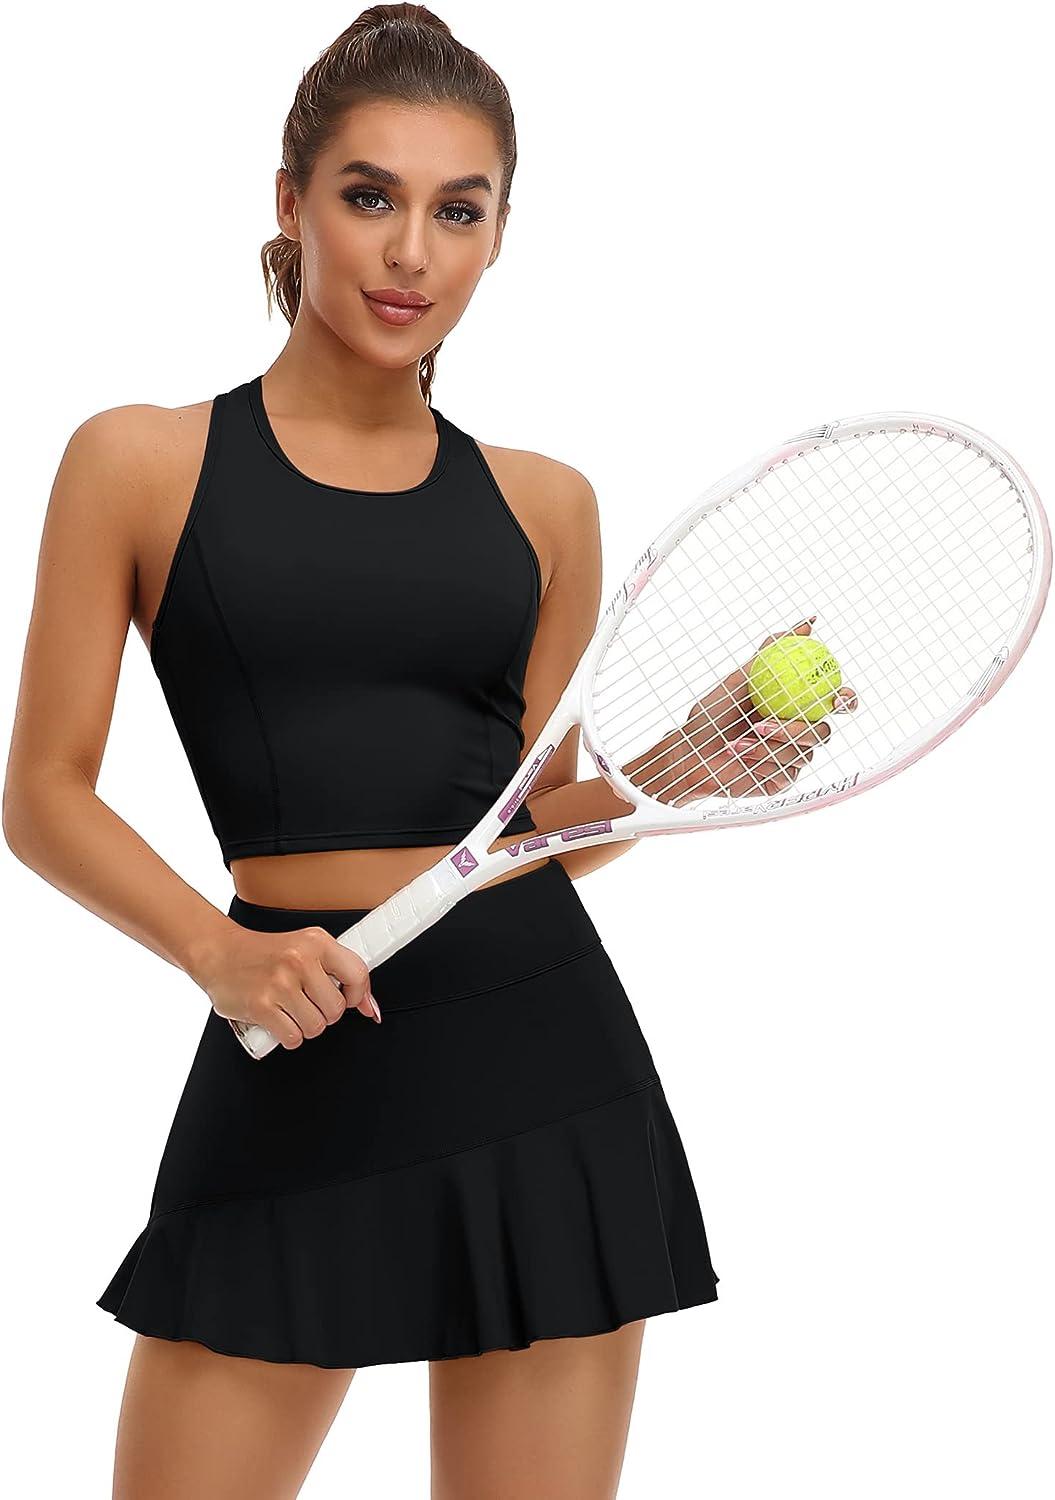 ATTRACO 2 Piece Tennis Dresses for Women Athletic Workout Dress